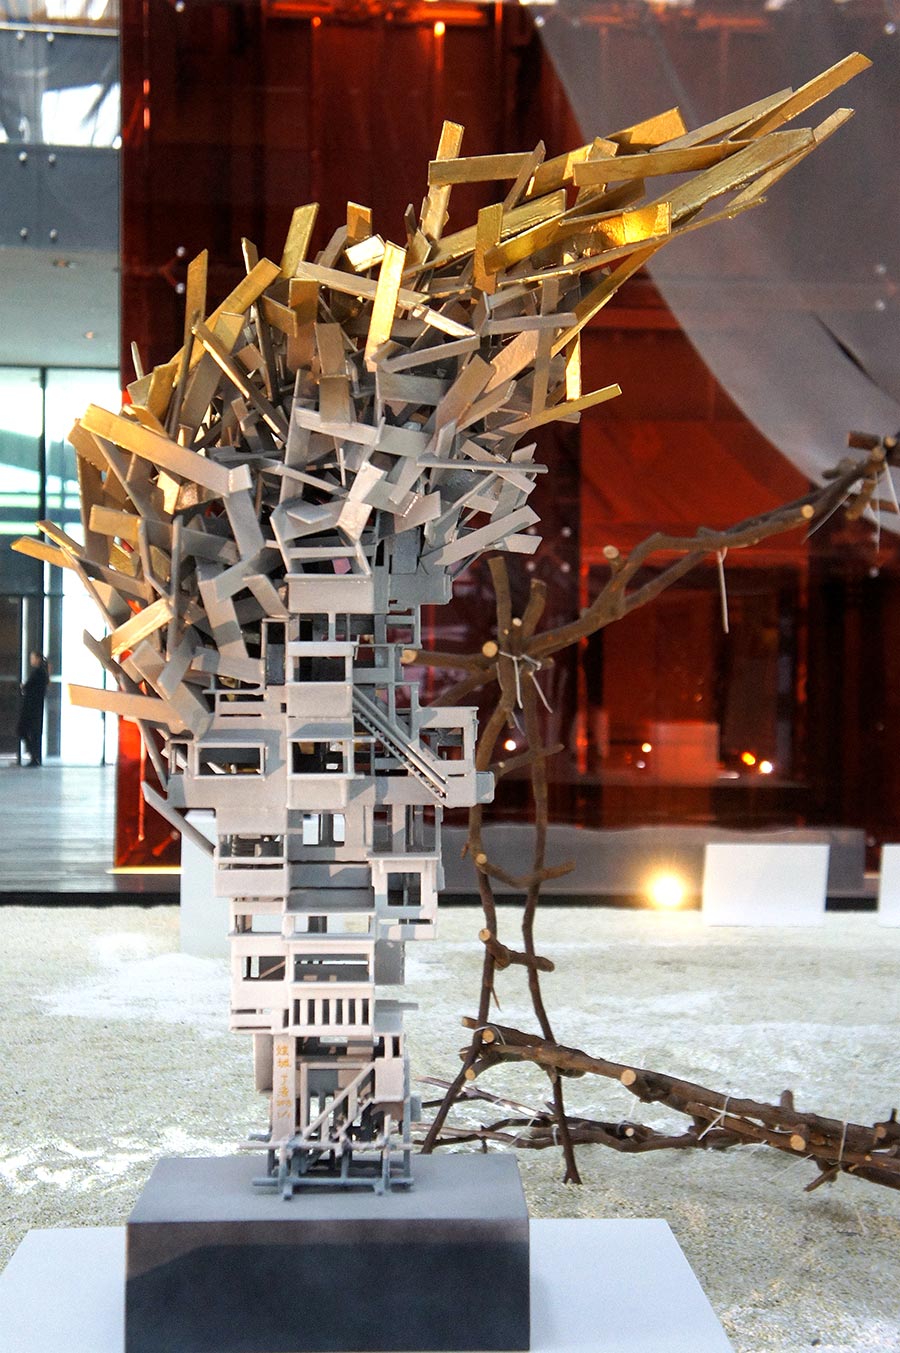 Artist presents otherwordly structures at exhibition